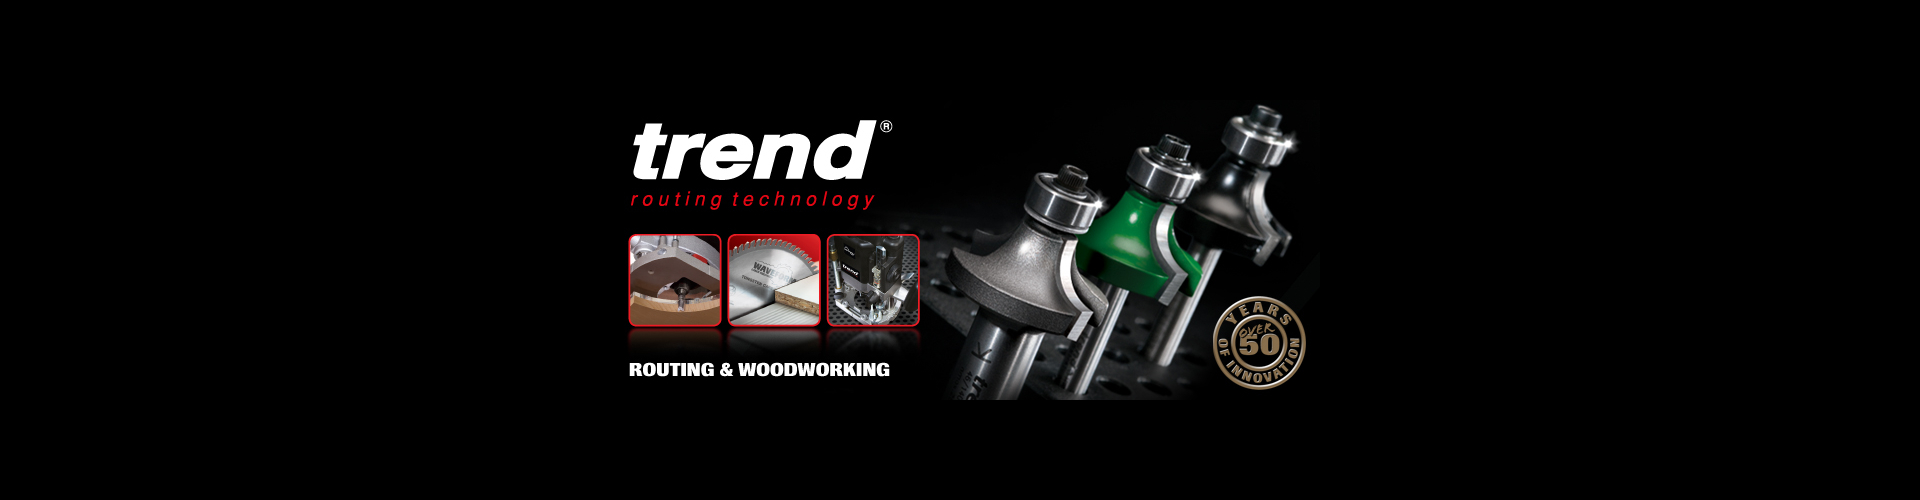 Trend tool banner showing examples of Trend router bits